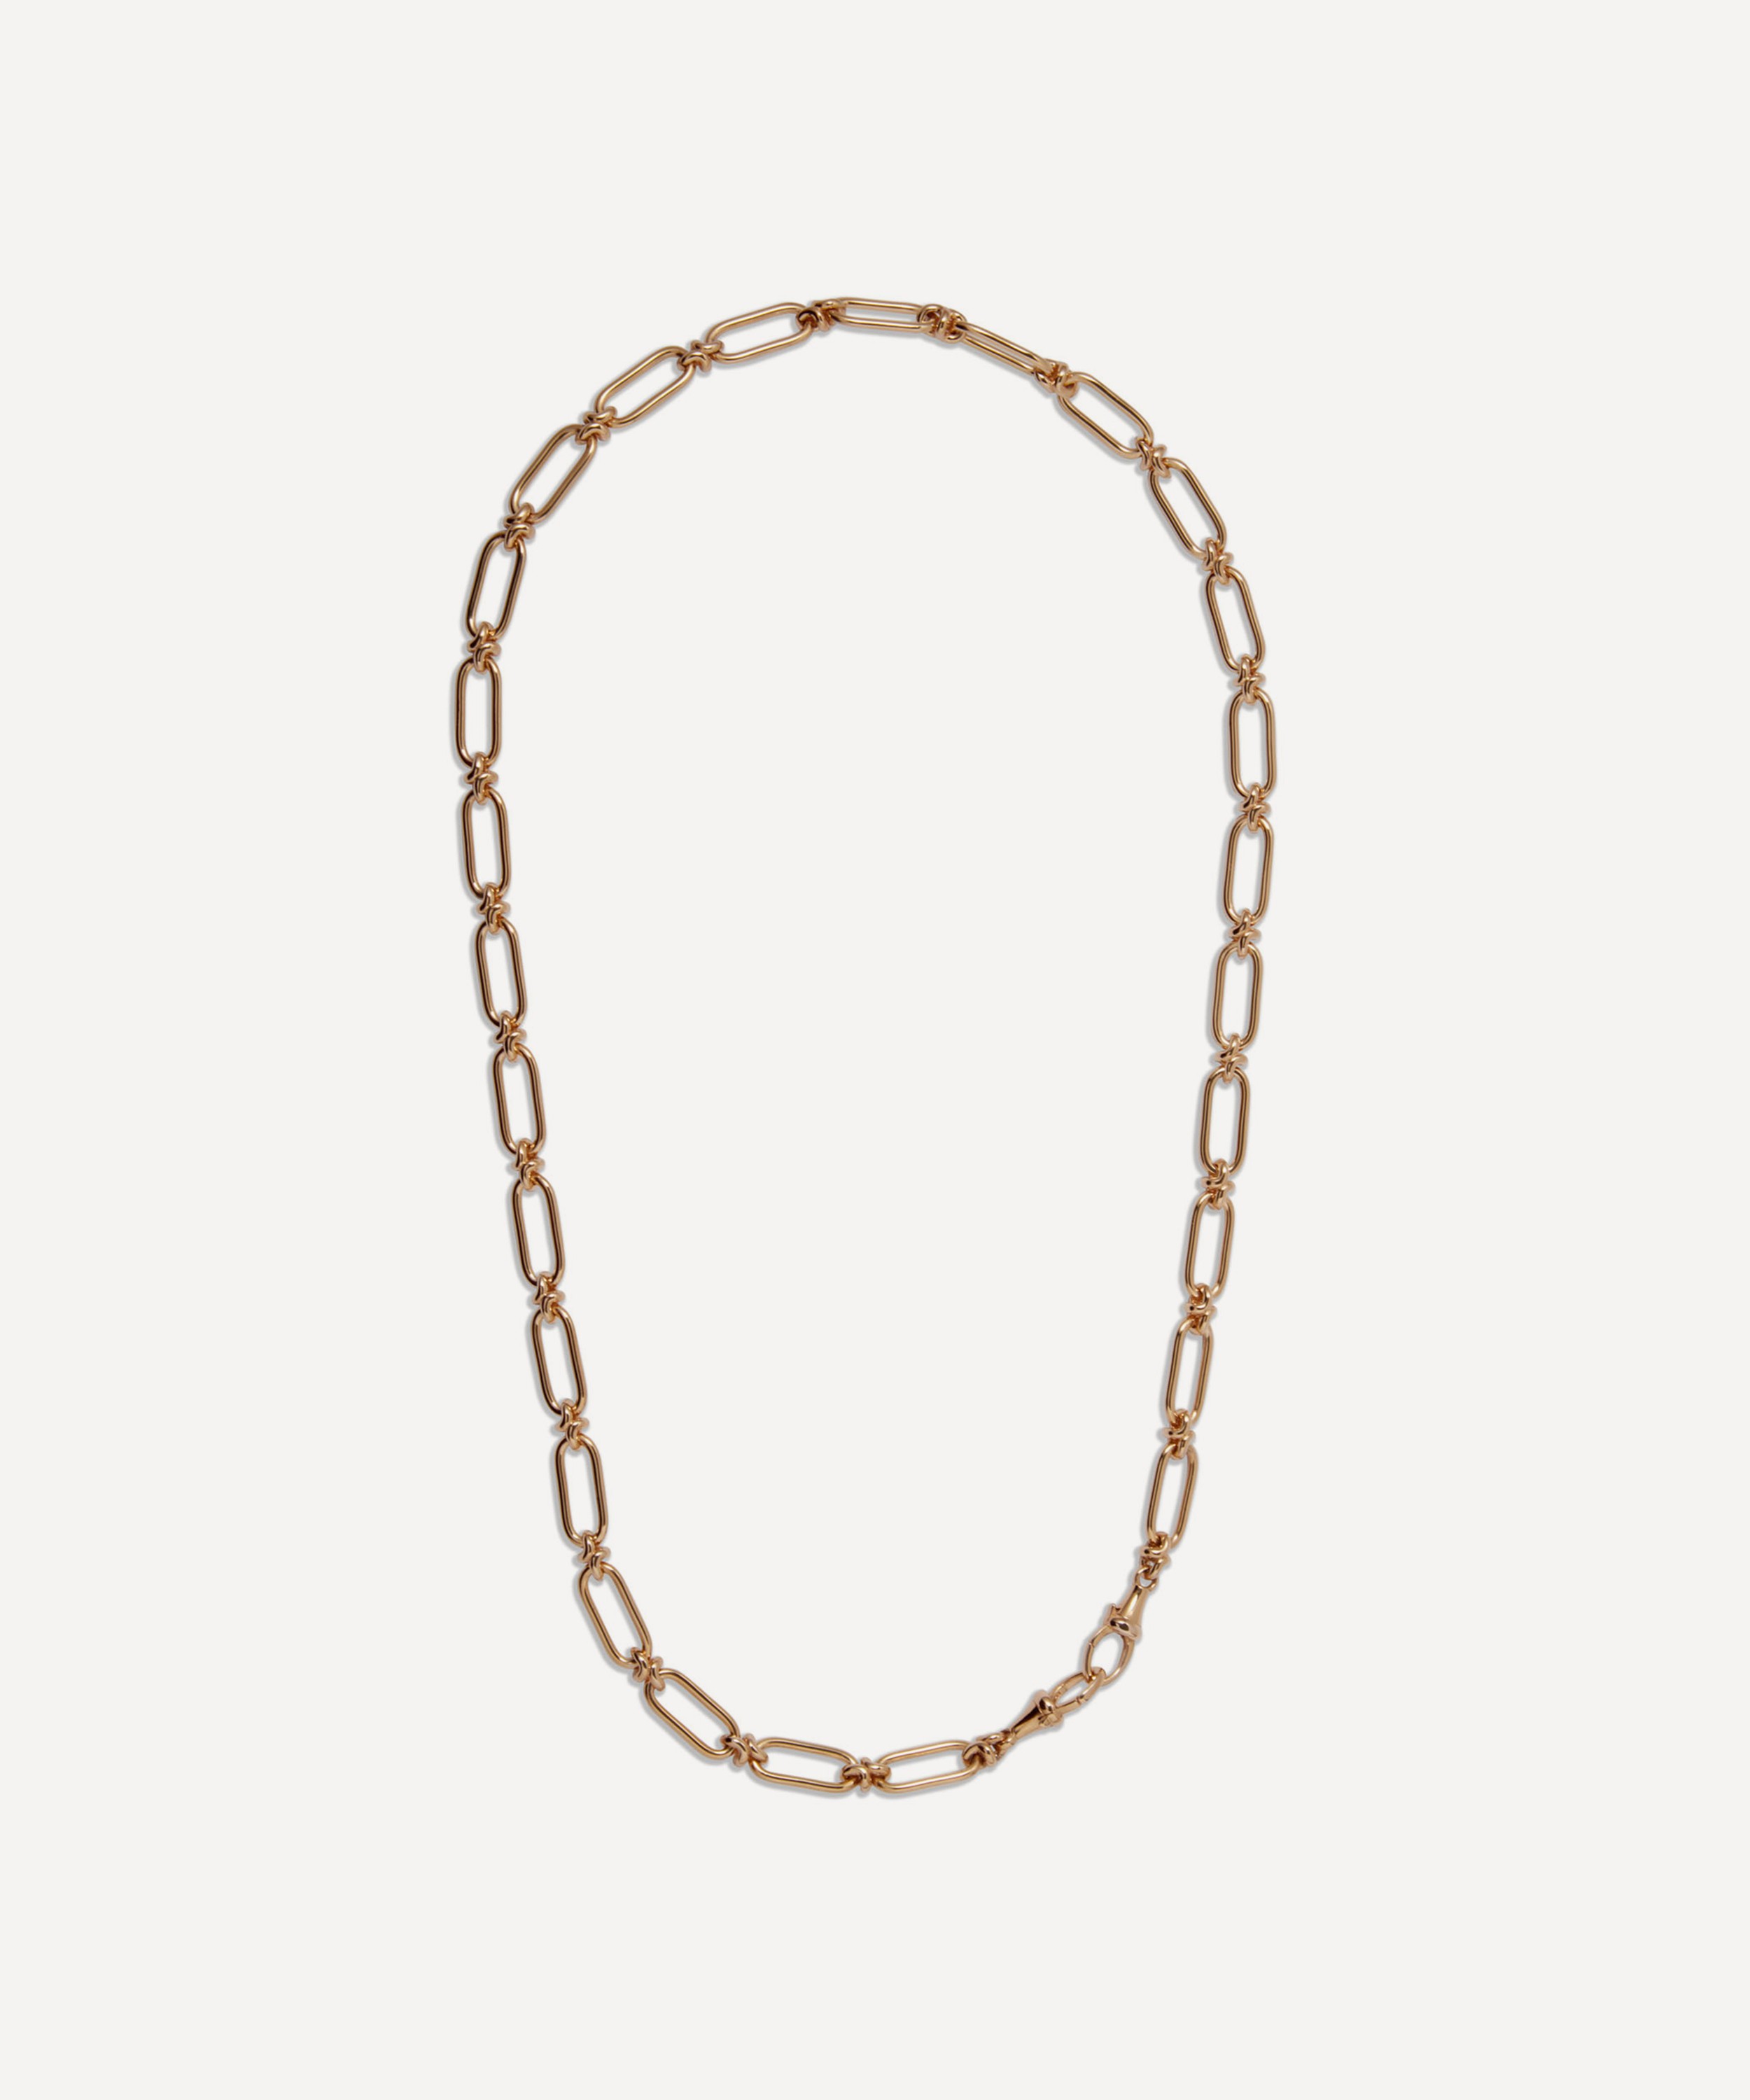 Annoushka - 14ct Gold Knuckle Bold Link Chain Necklace